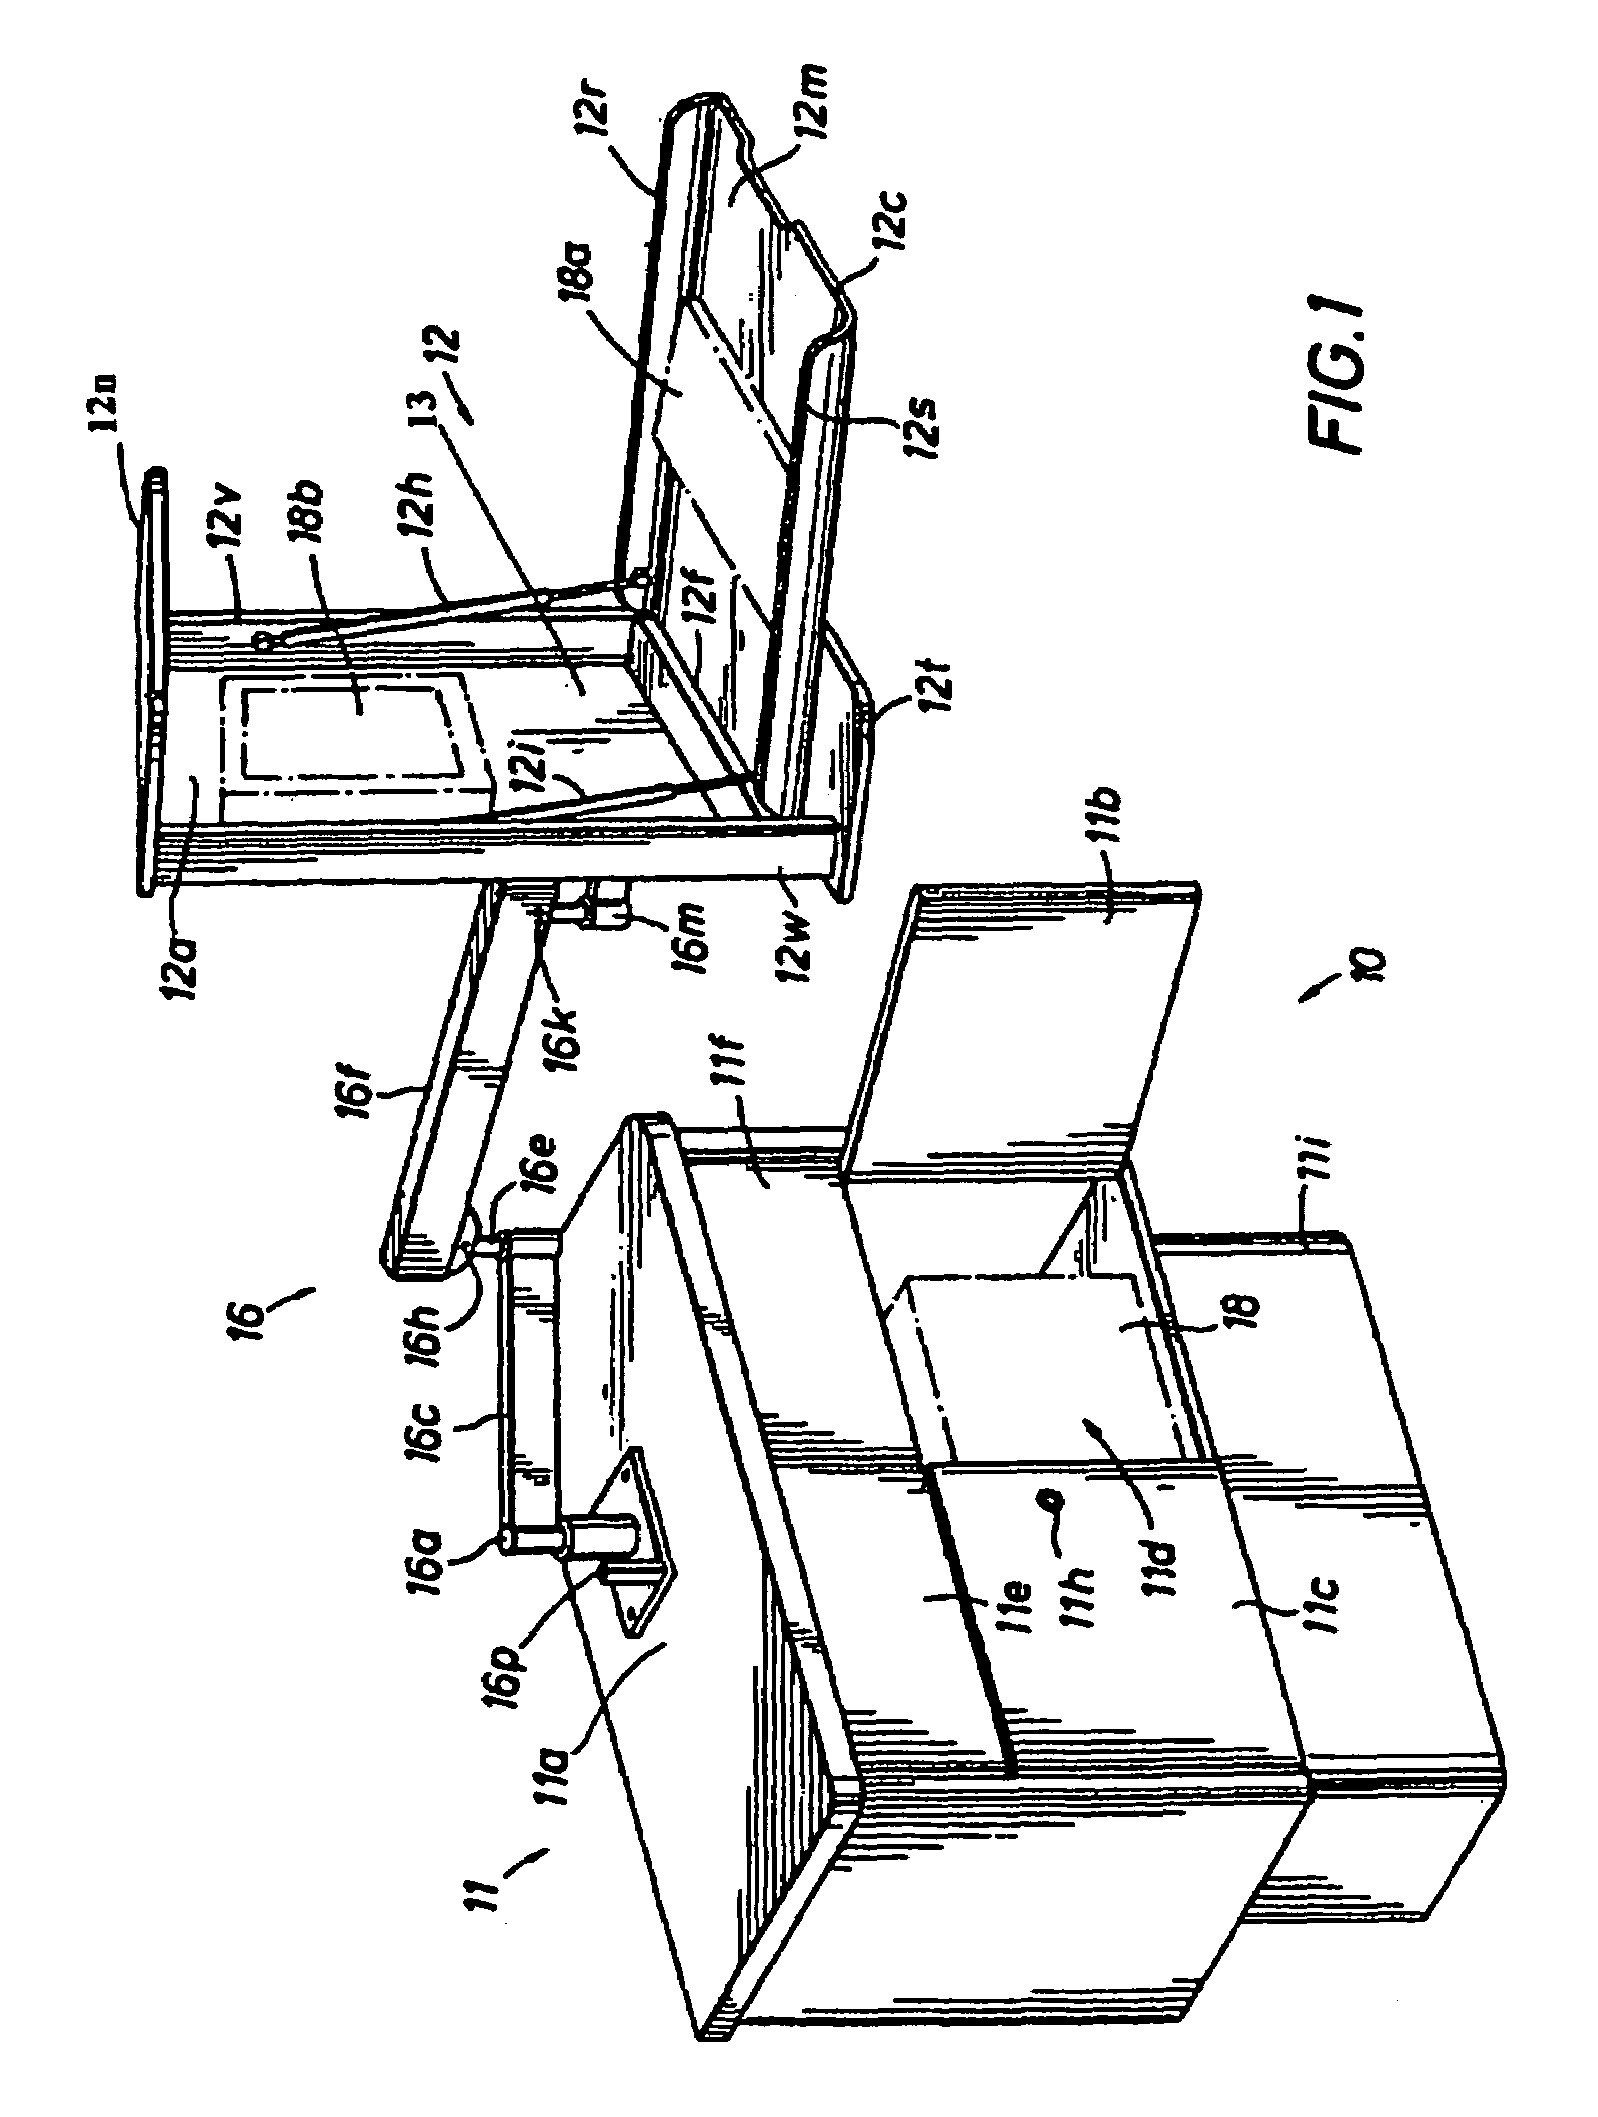 Retractable multiposition furniture system